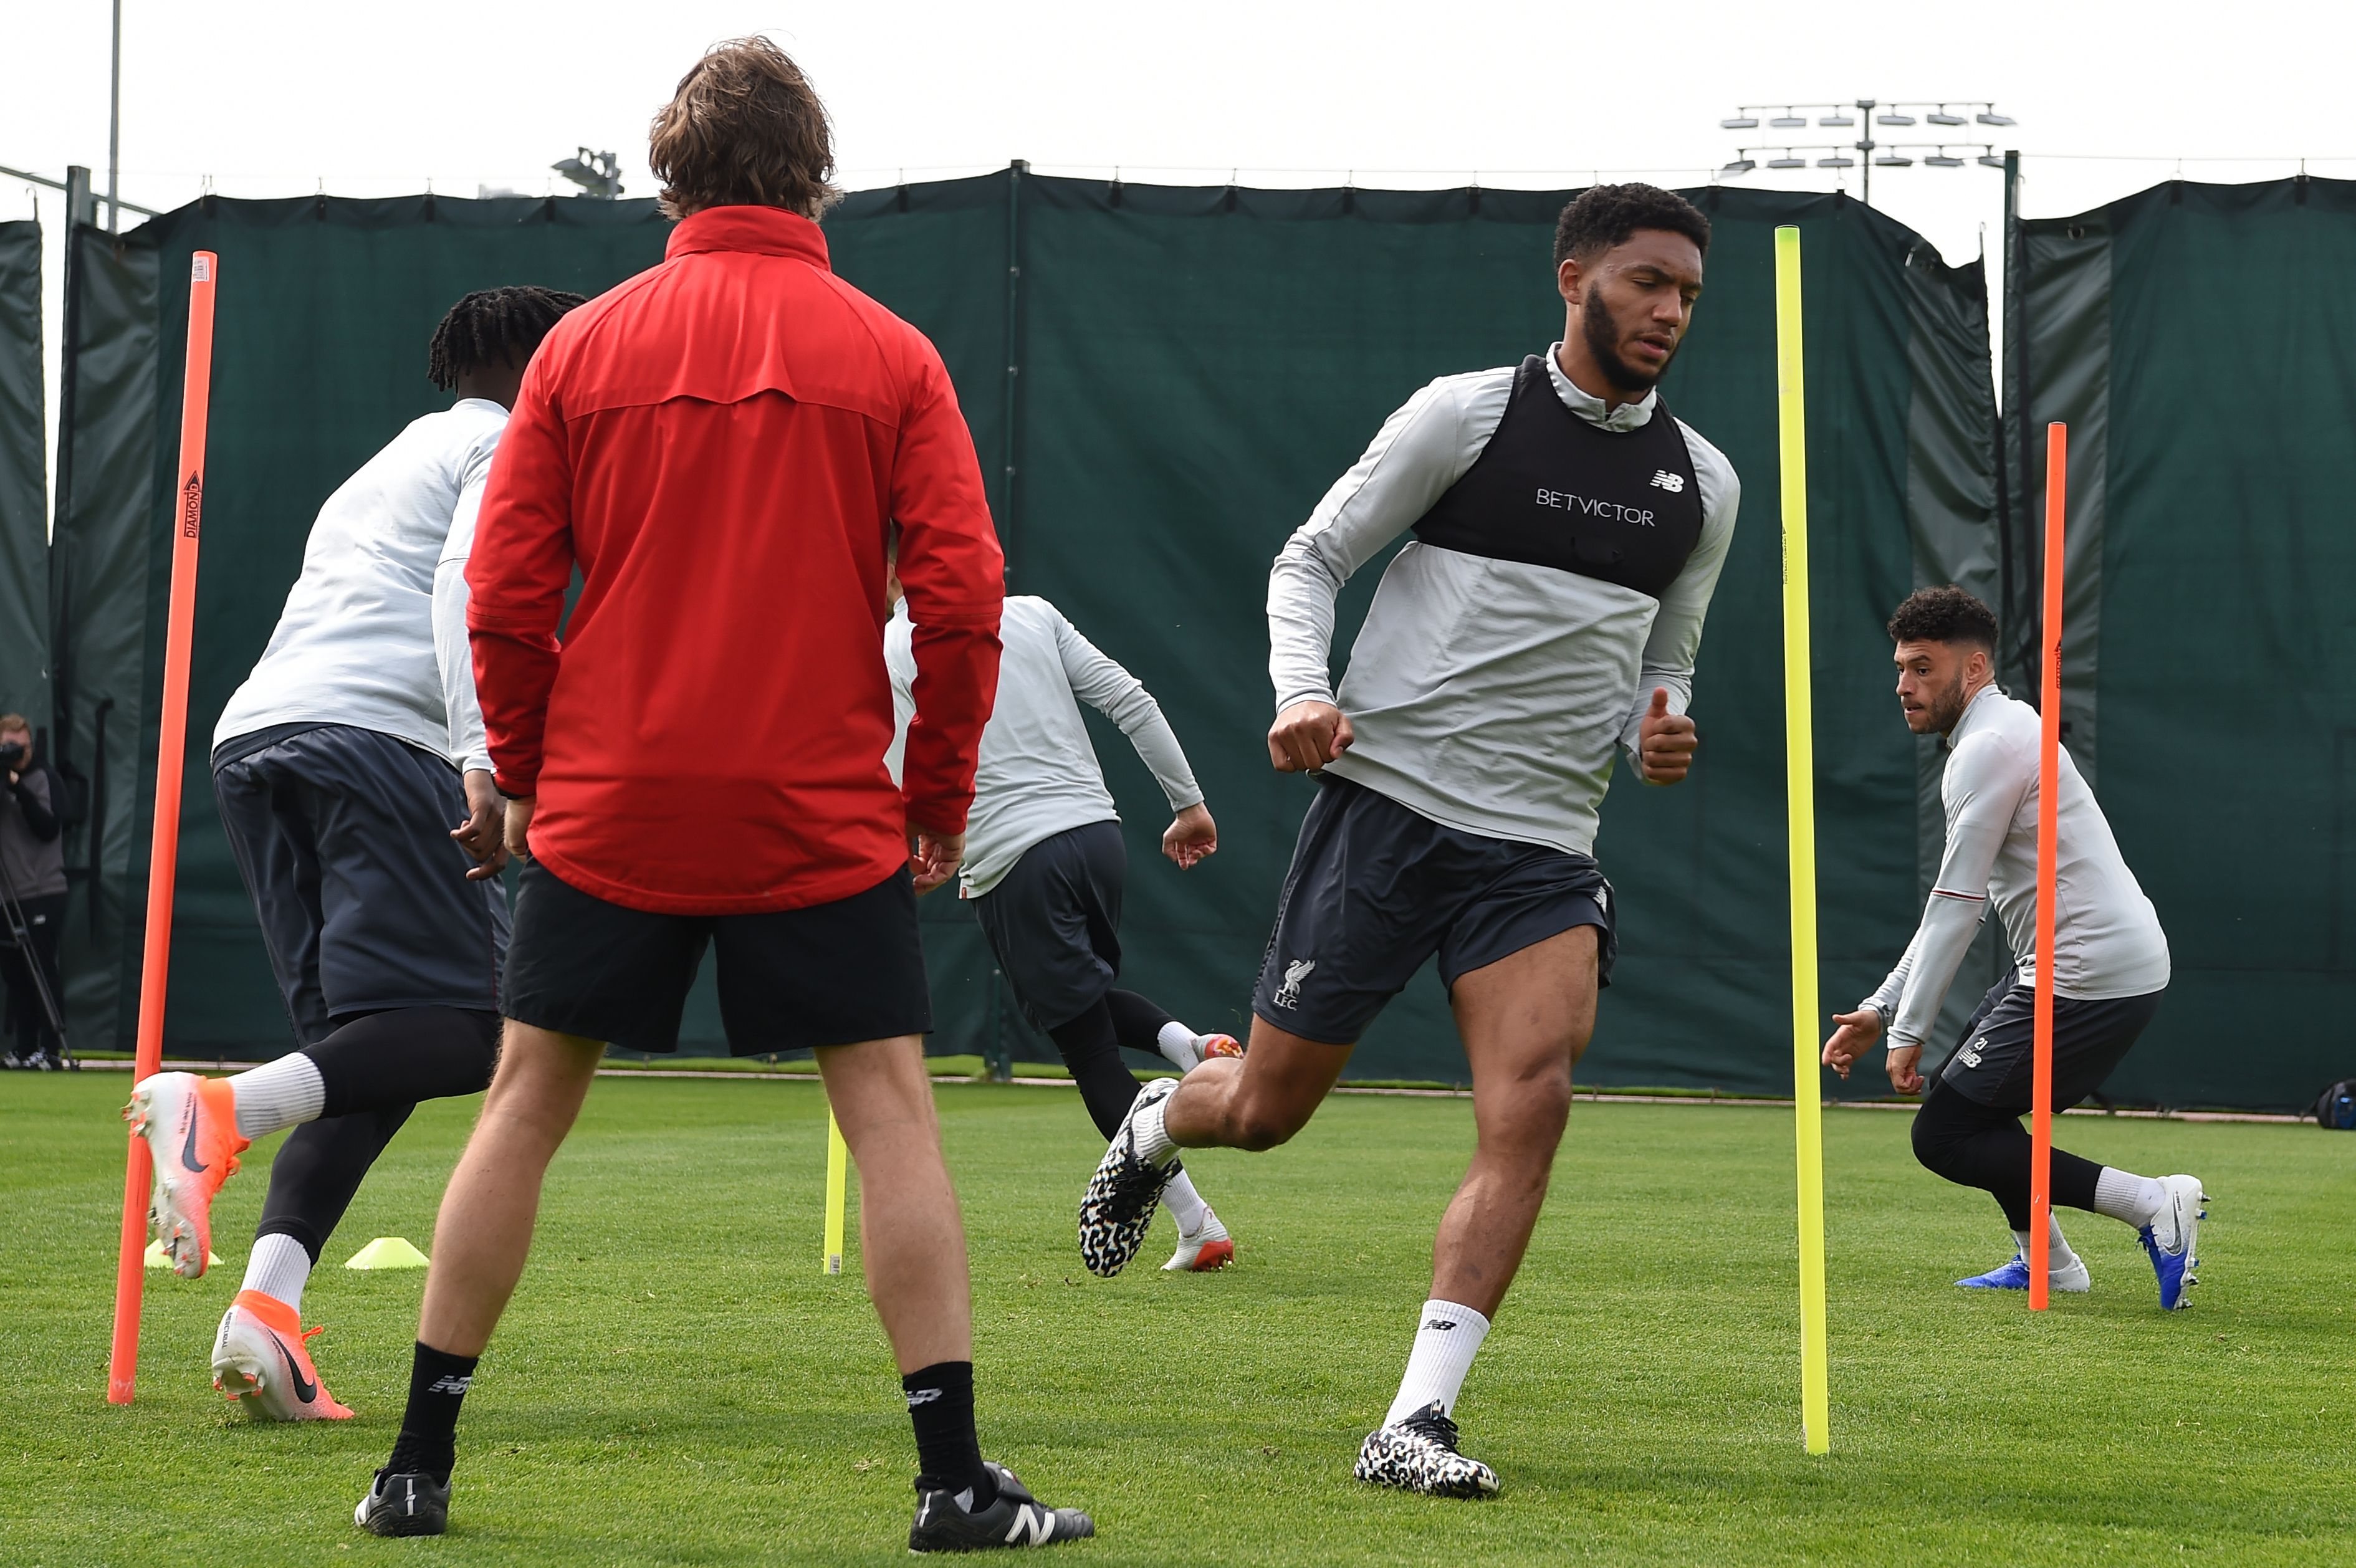 Liverpool's English defender Joe Gomez (2R) and Liverpool's English midfielder Alex Oxlade-Chamberlain (R) take part in a team training session at Melwood in Liverpool, north west England on April 30, 2019, on the eve of their UEFA Champions League semi-final first leg football match against Barcelona. (Photo by Paul ELLIS / AFP)        (Photo credit should read PAUL ELLIS/AFP via Getty Images)